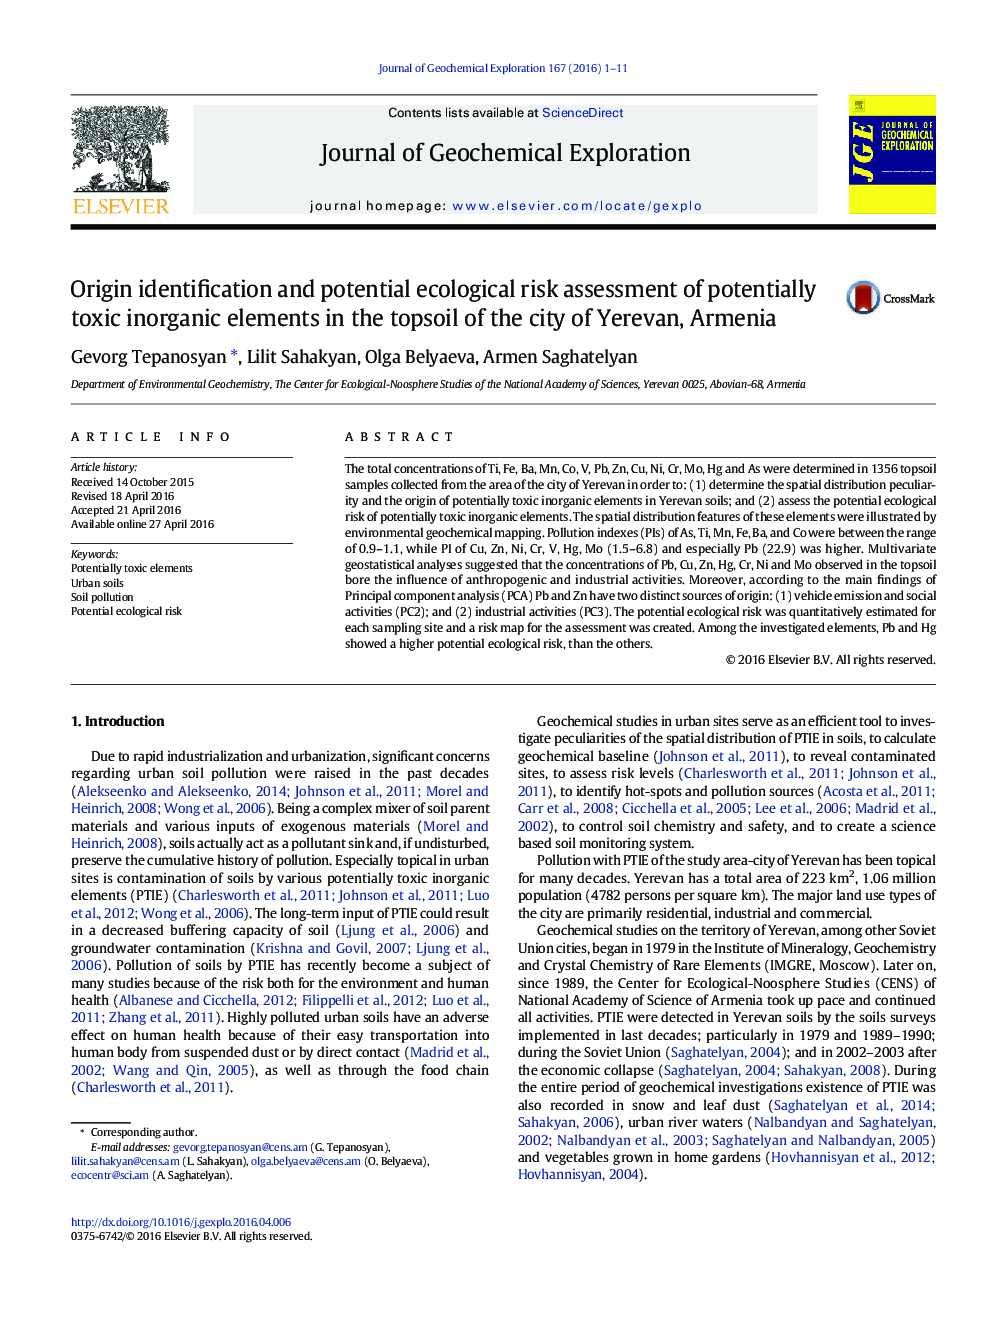 Origin identification and potential ecological risk assessment of potentially toxic inorganic elements in the topsoil of the city of Yerevan, Armenia